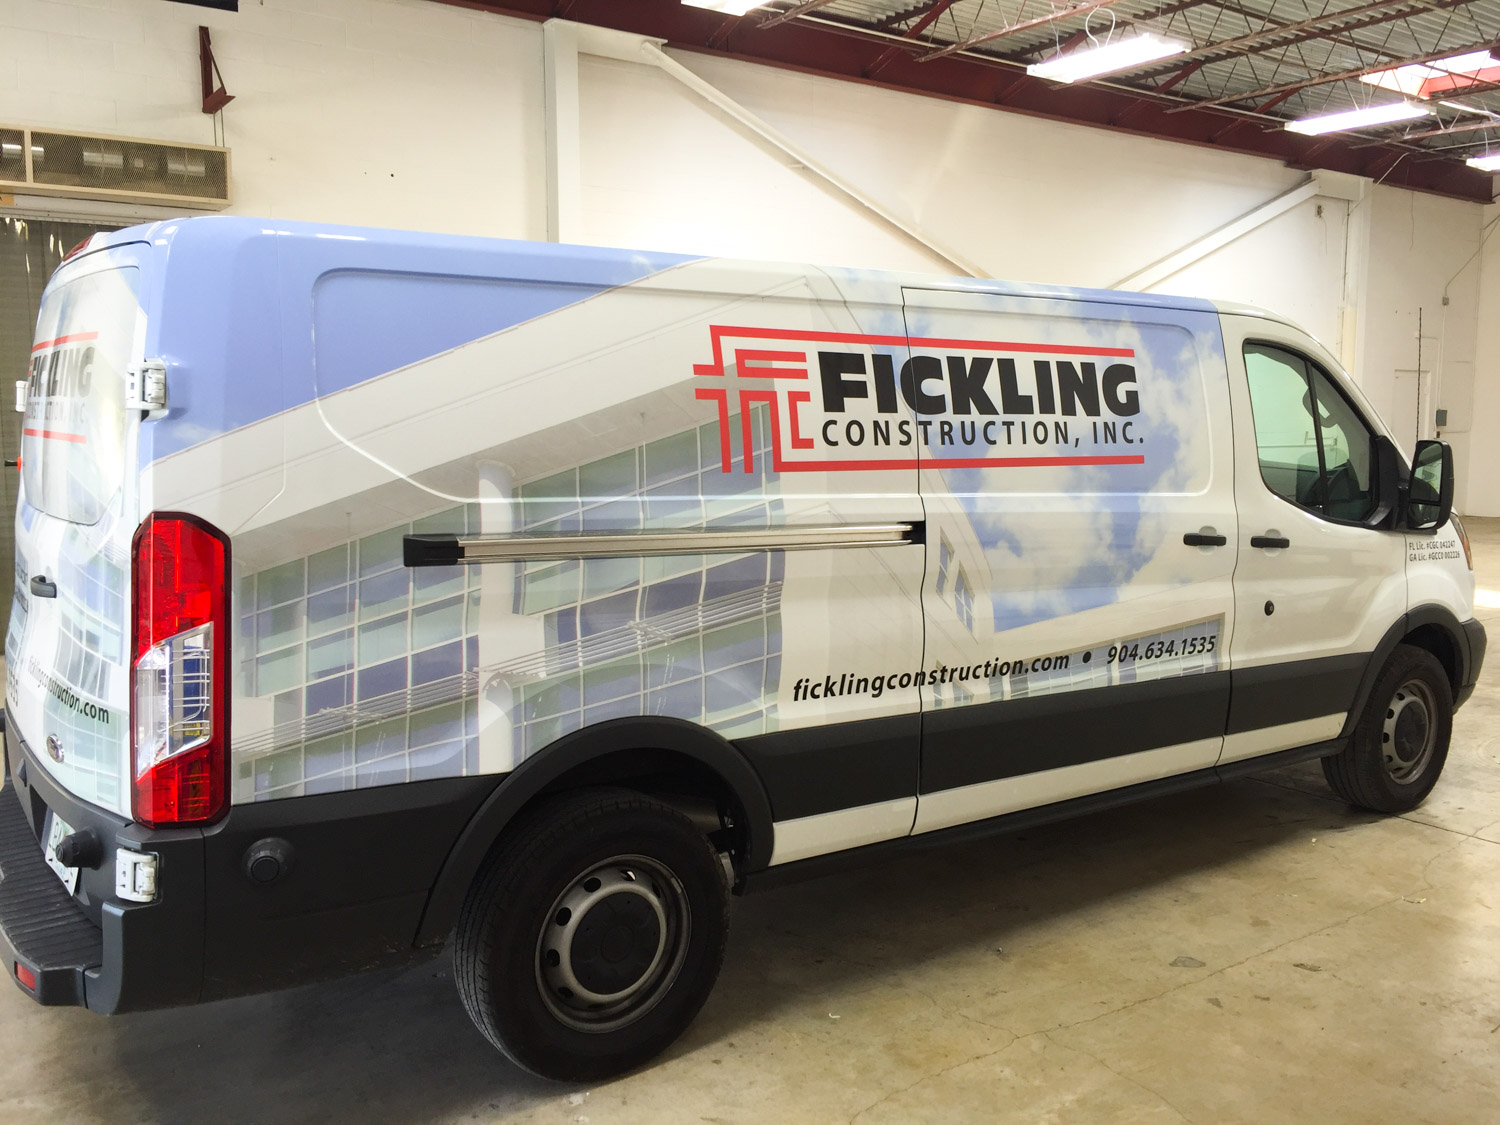 Ficking Construction Vehicle Wrap